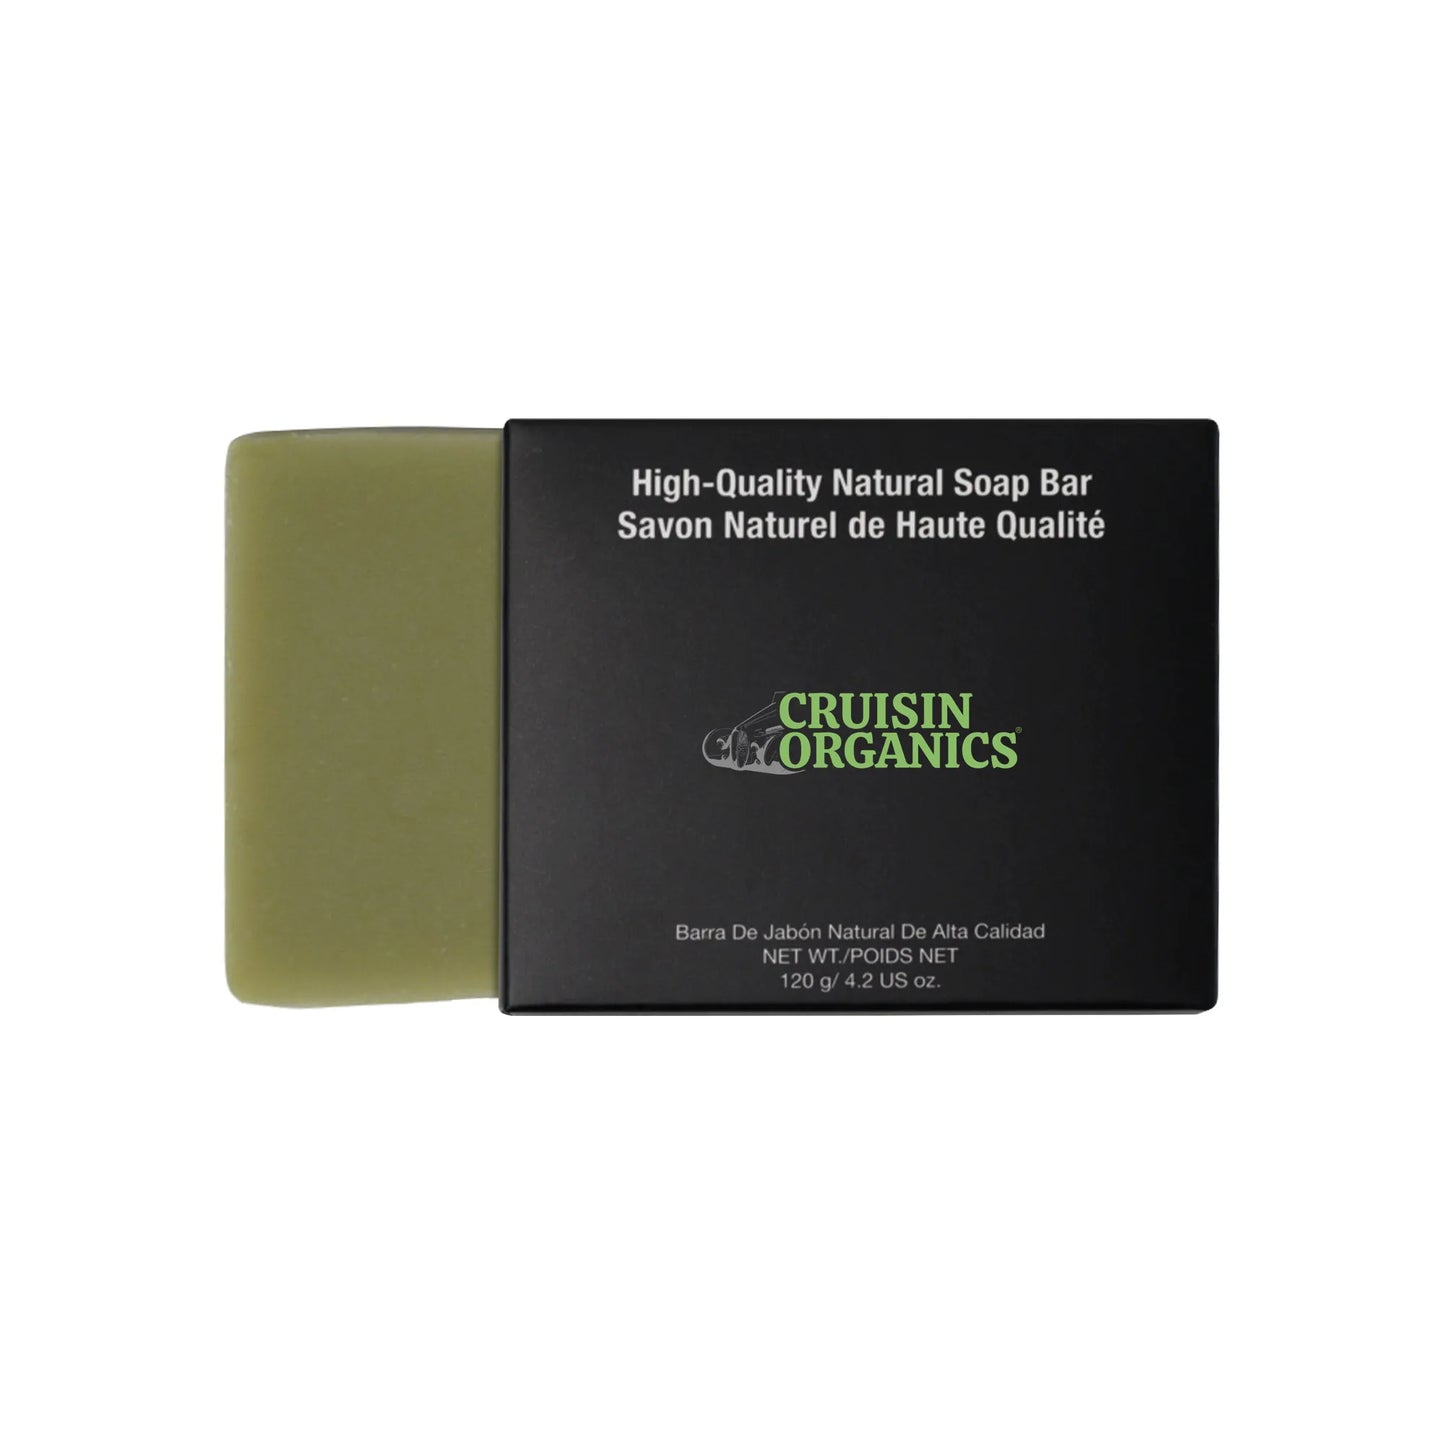 Feel the power of Crjuisin Organics Aloe Vera Soap in this natural, aloe-rich, soothing soap. With plant-based, skin-soothing ingredients, your skin will glow and feel plump after a single wash. Aloe vera is the perfect ingredient to soothe dry, irritated, and itchy skin from environmental stressors. With a blend of natural goat’s milk and shea butter, this is the ideal lathering soap to lather your skin in luxury. Packed with natural ingredients and essential oils, this soap is for  body, face, and hands.